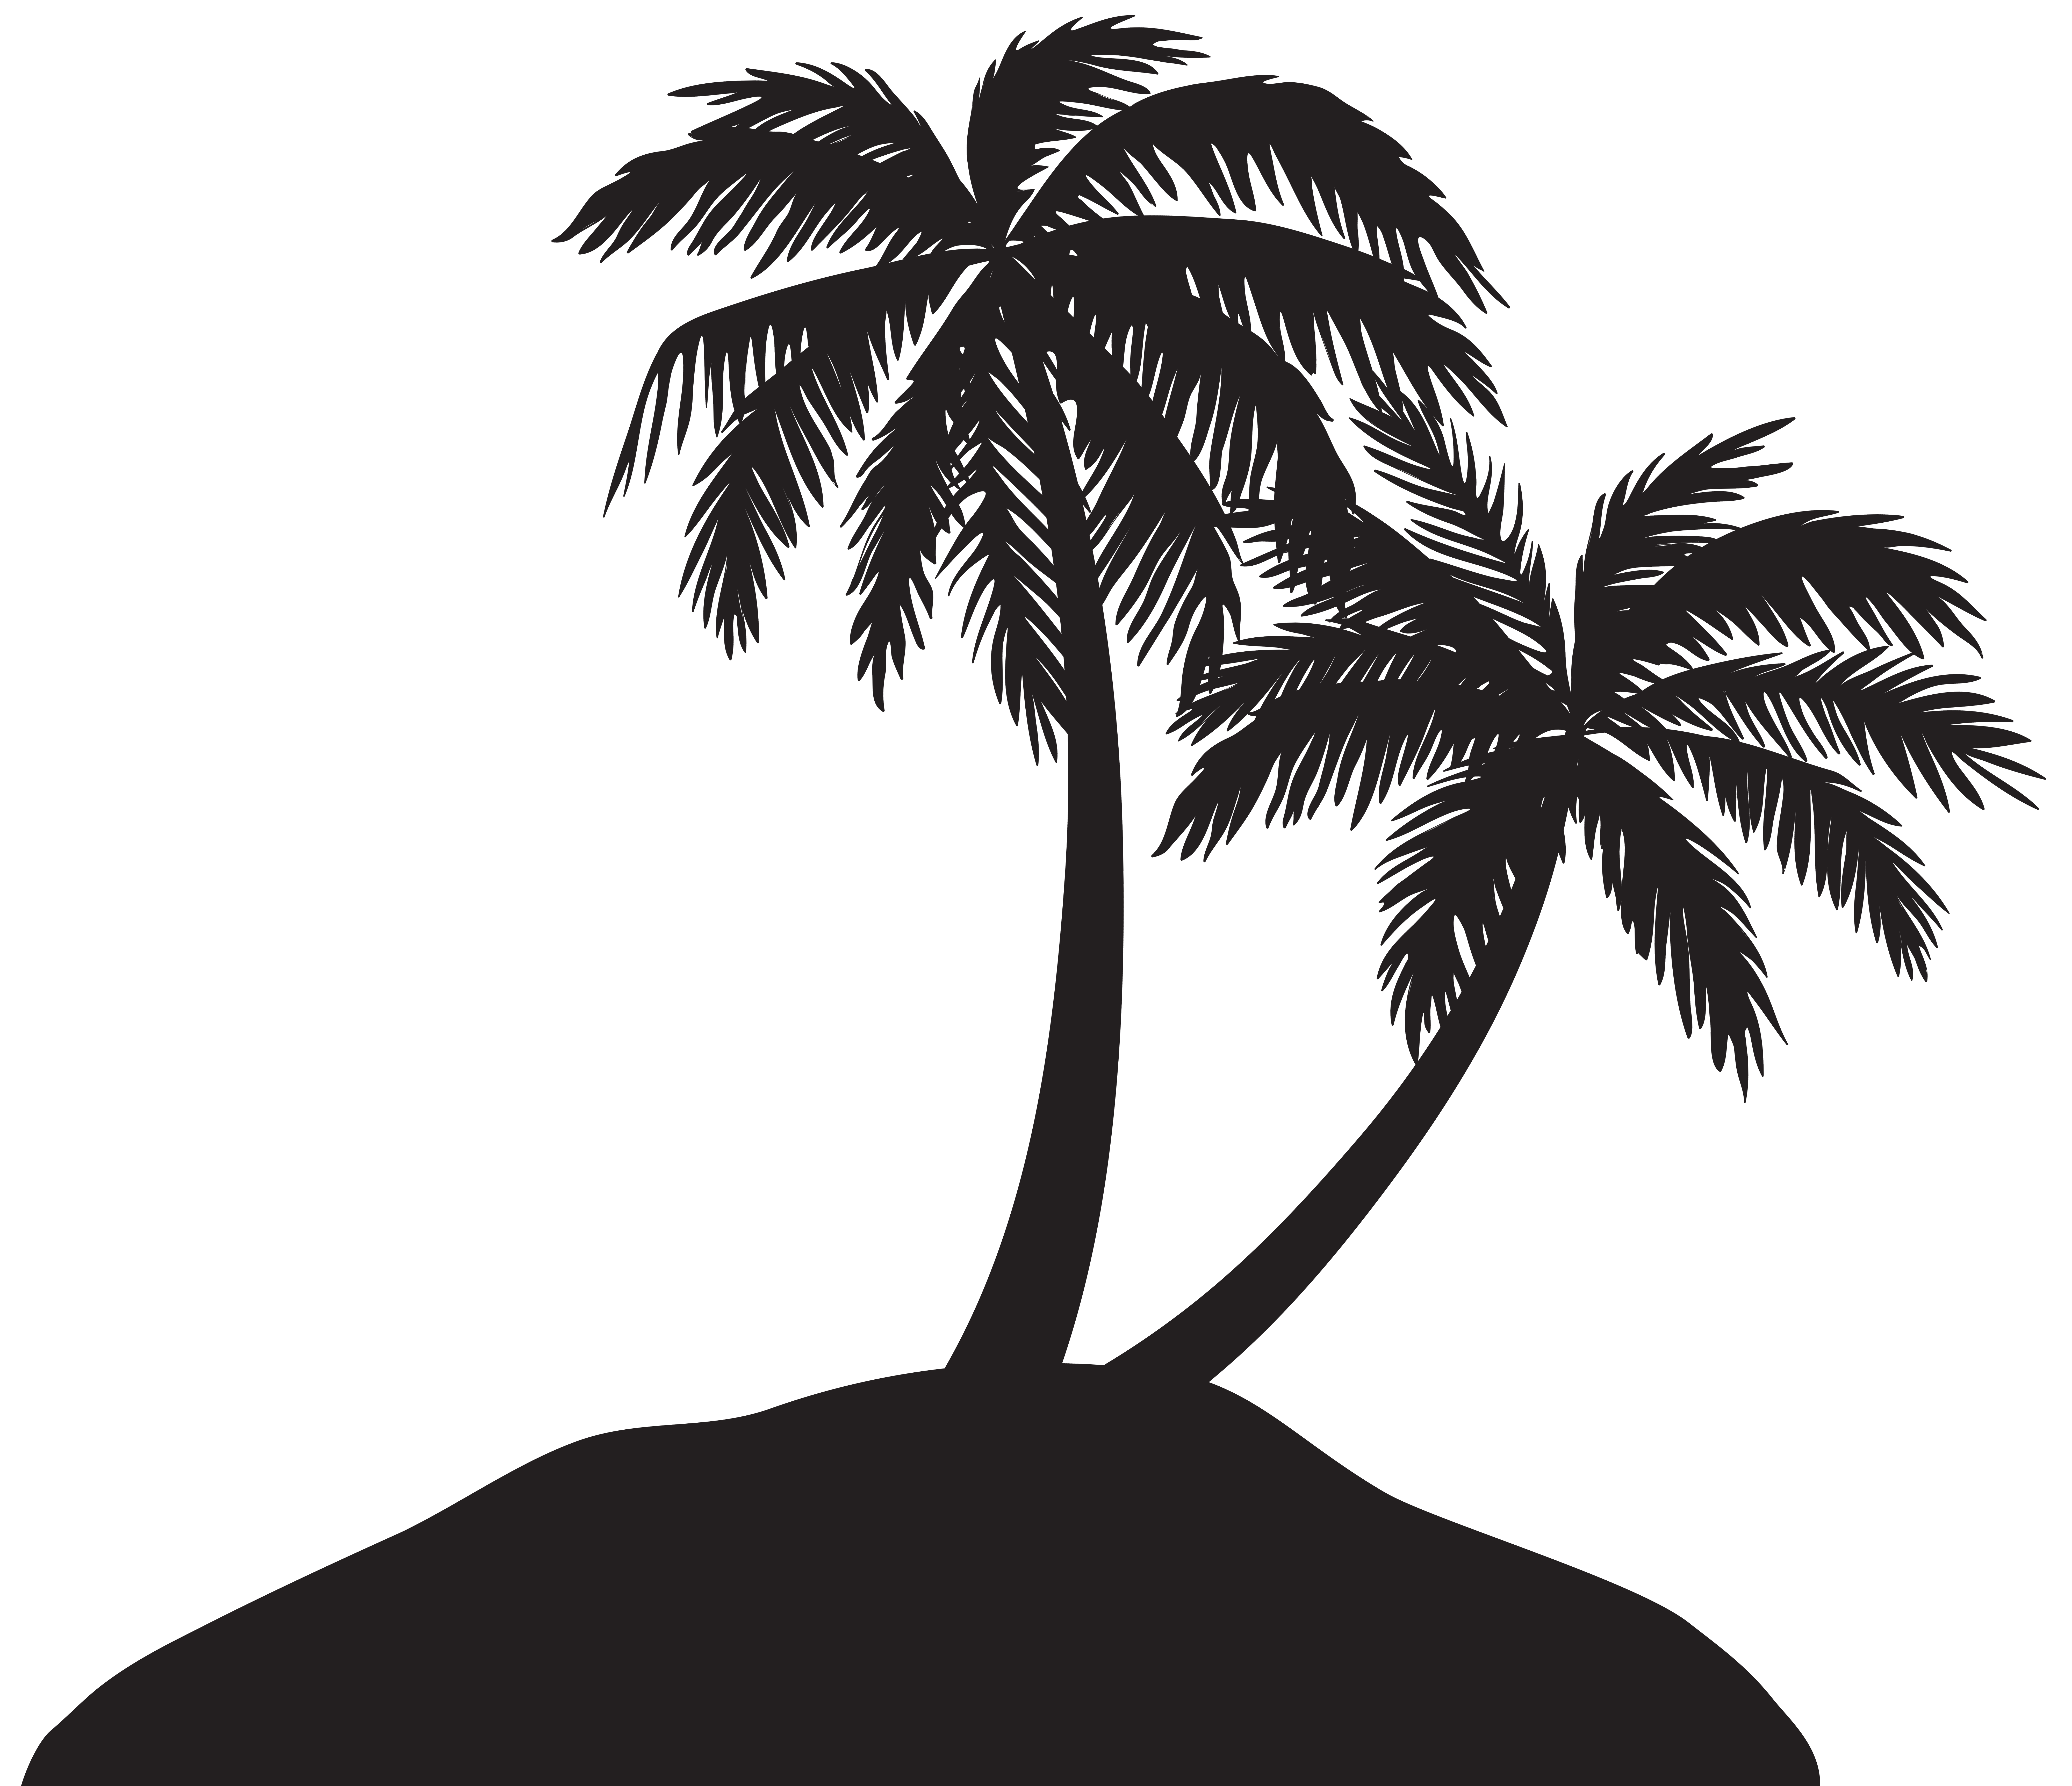 Island with trees silhouette. Easter clipart palm